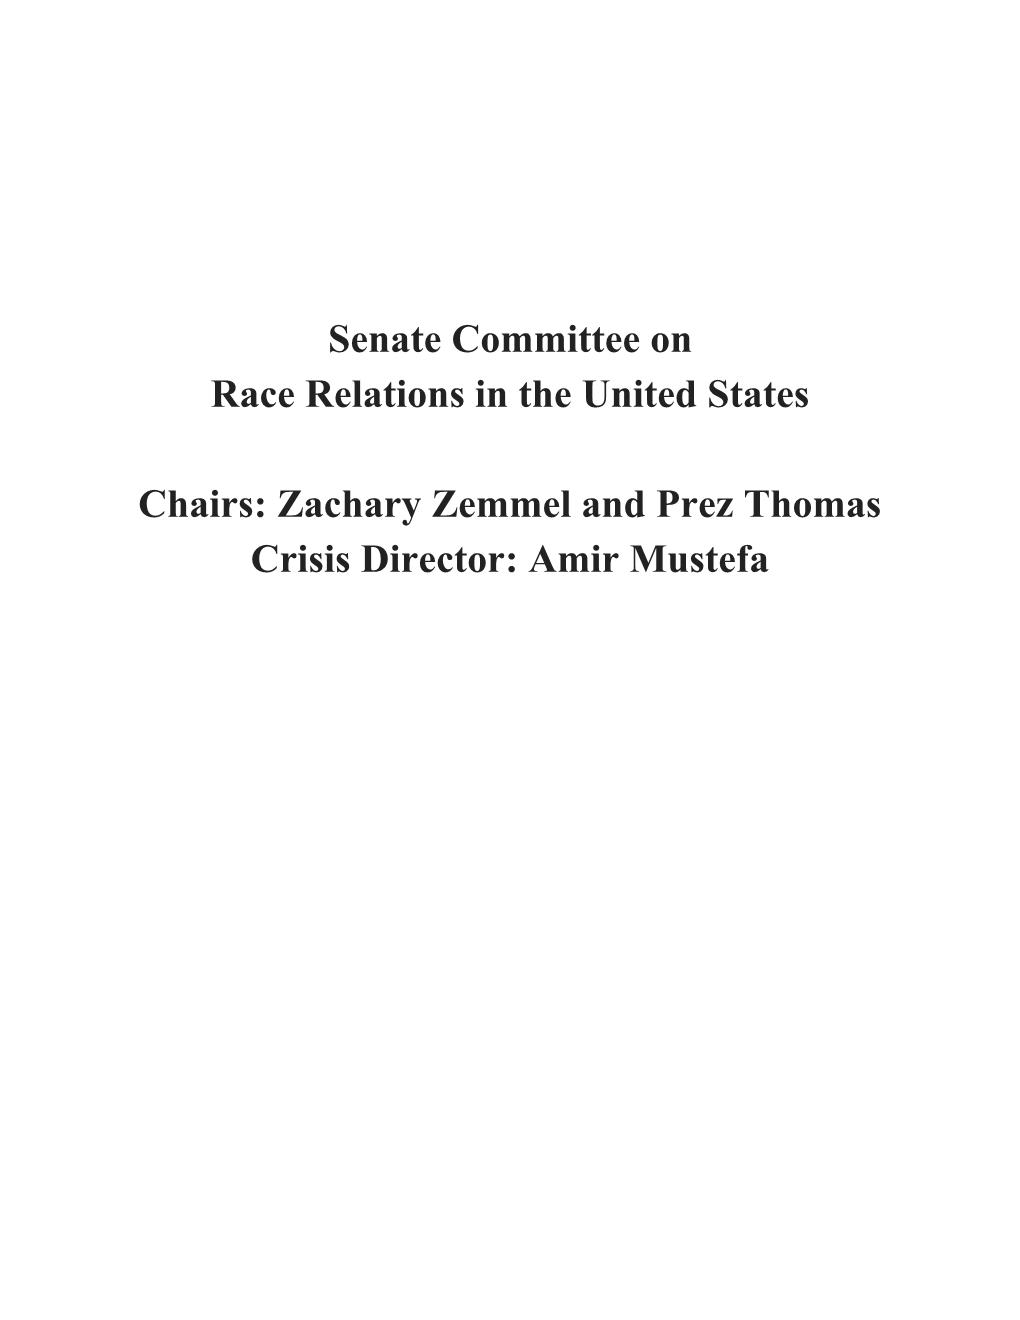 Senate Committee on Race Relations in the United States